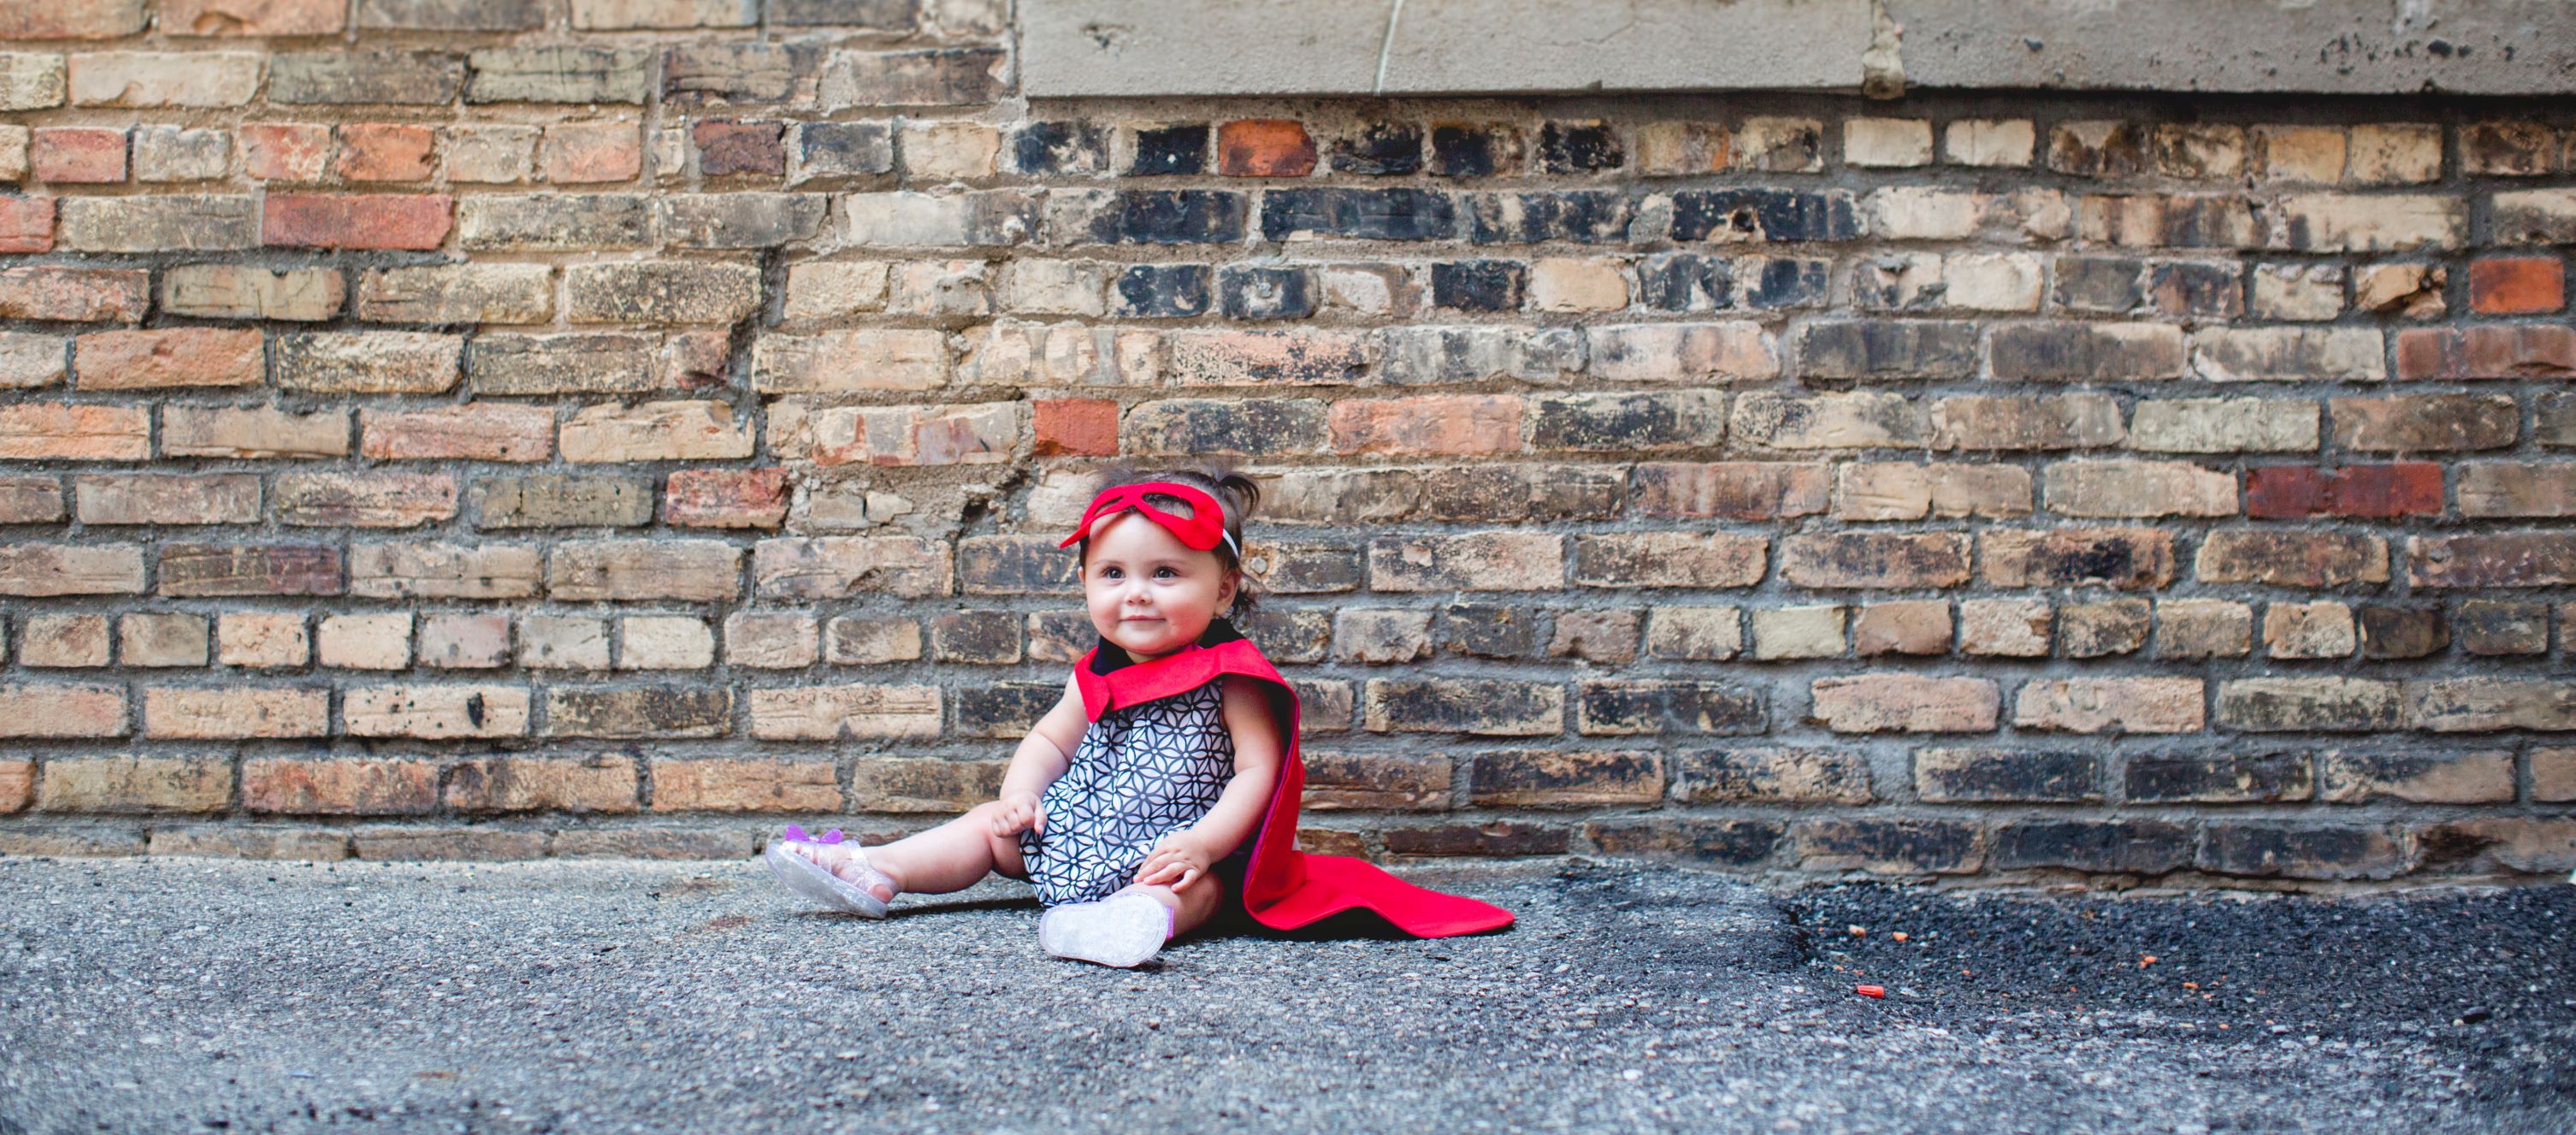 Baby girl sitting in front of brick building with a red cape and red bow in her hair, smiling